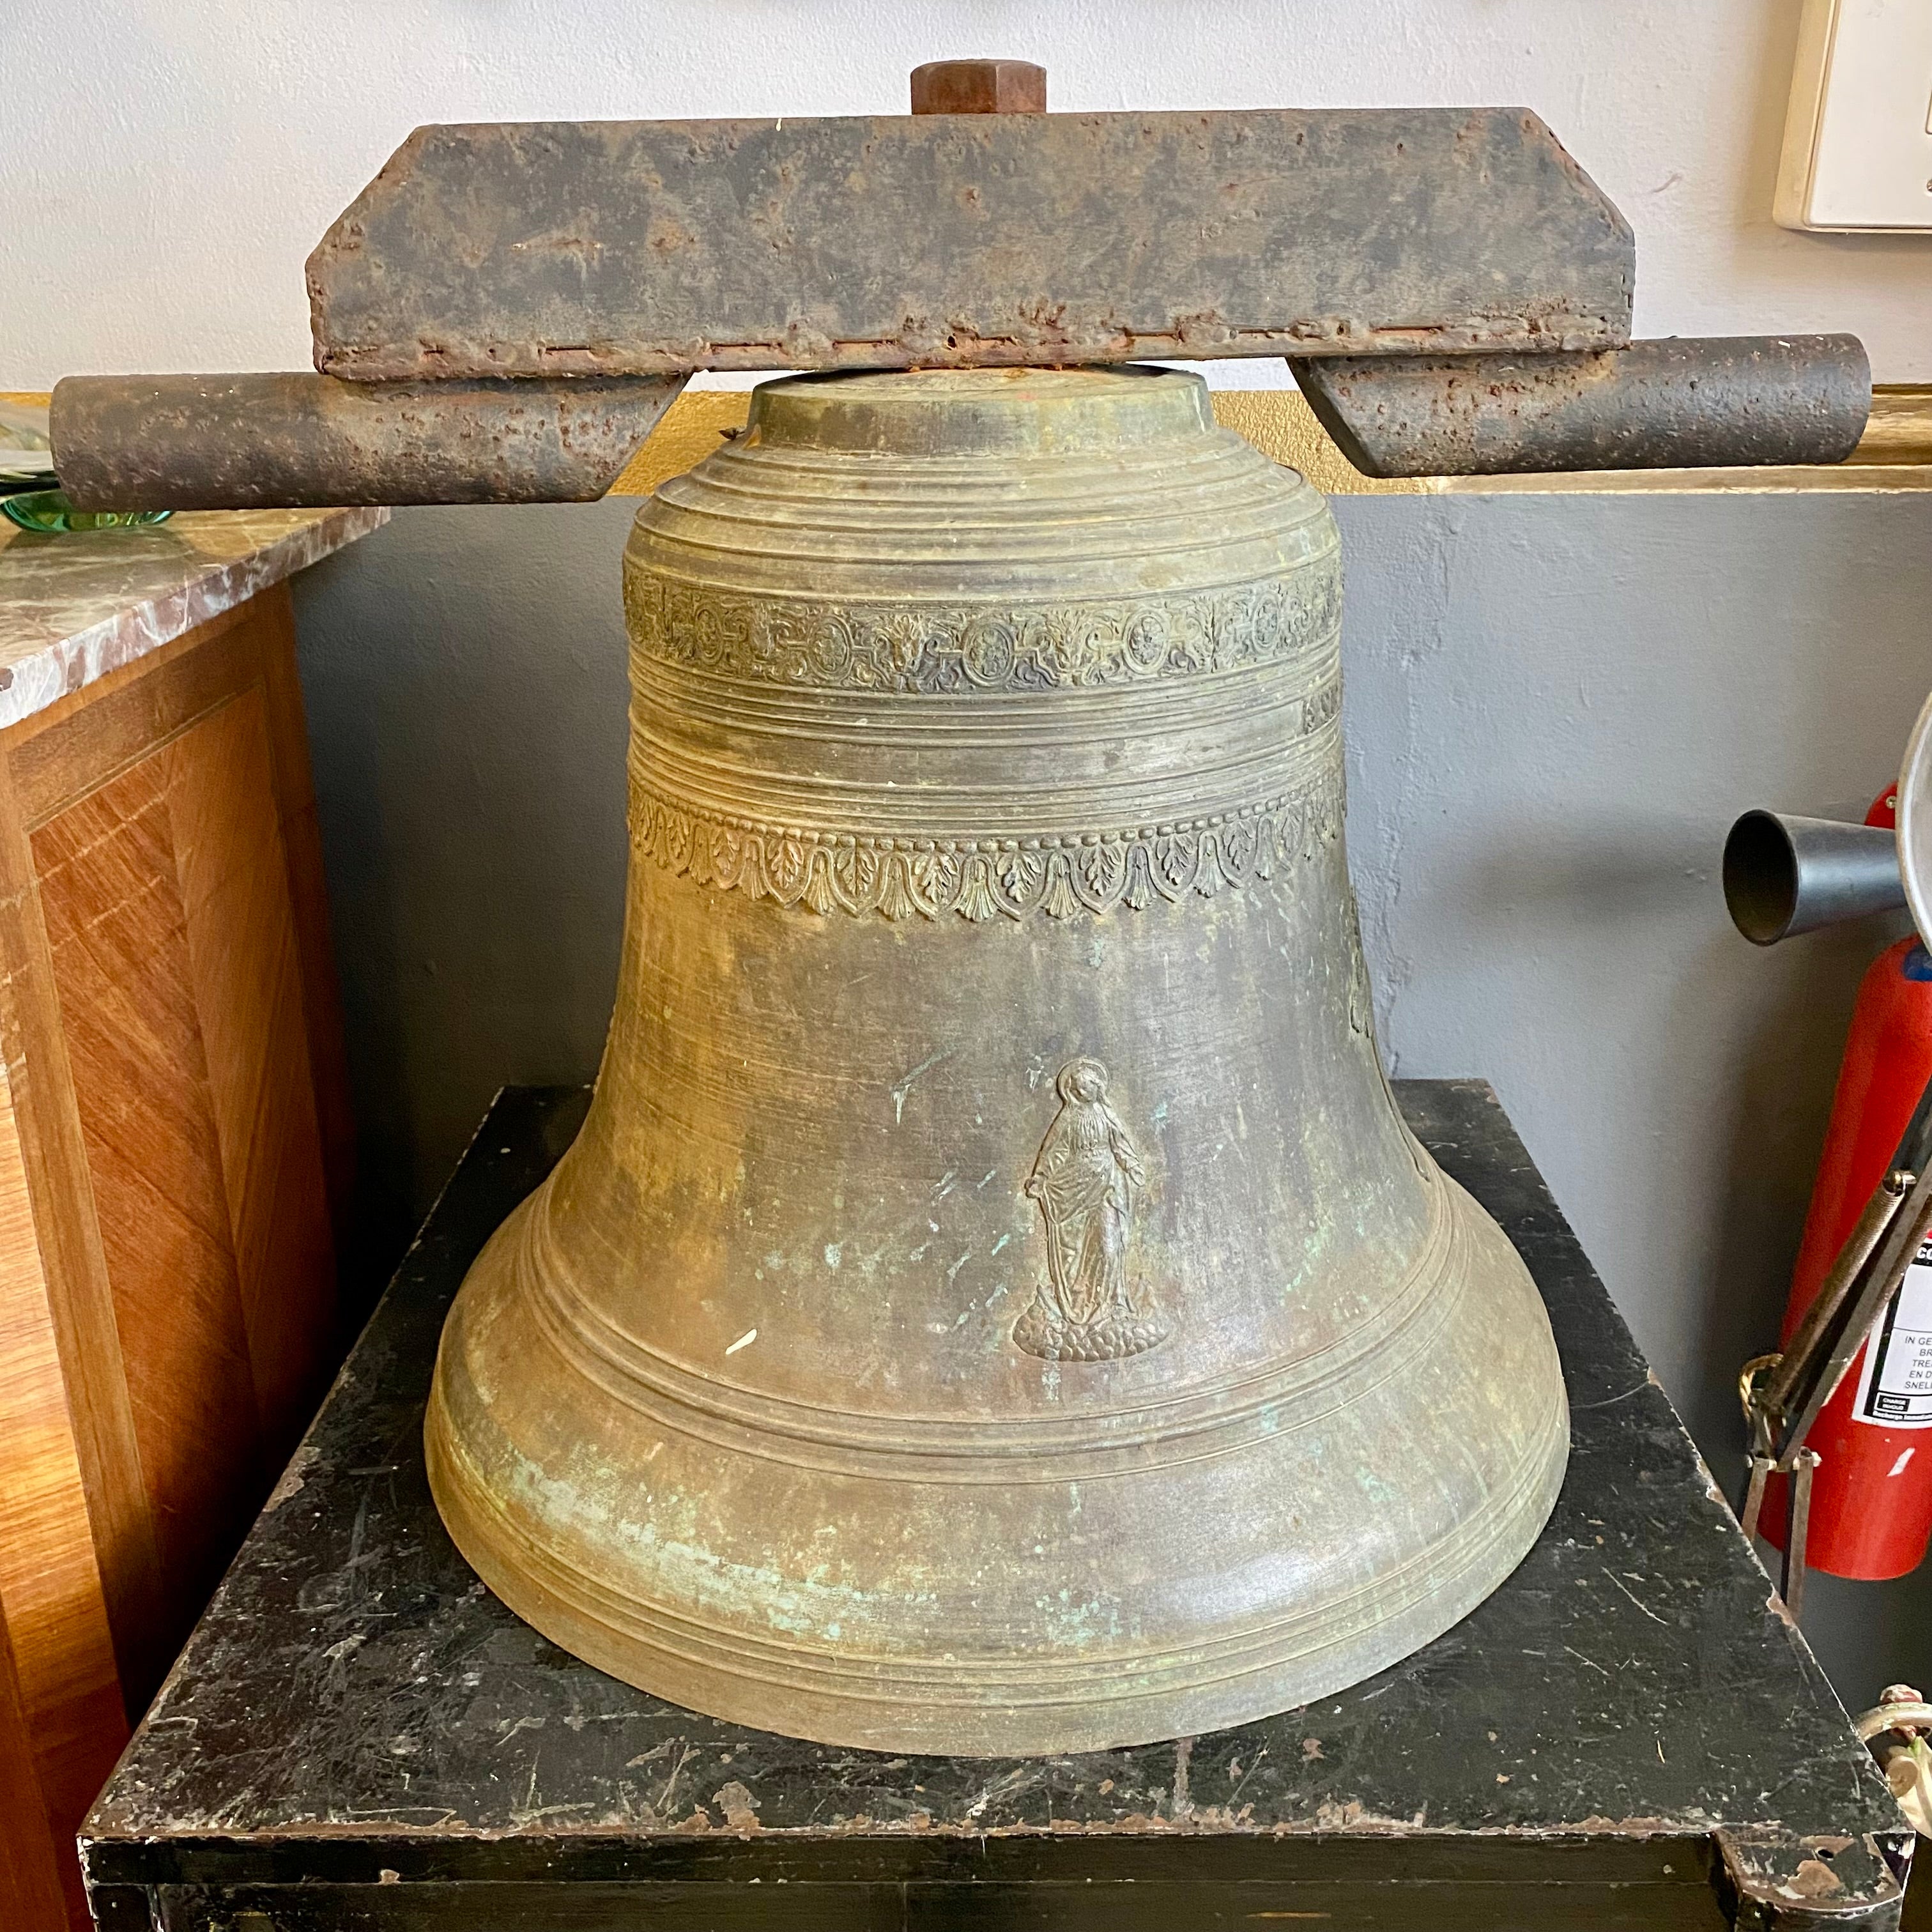 Small Metal Brass Bell for Worship